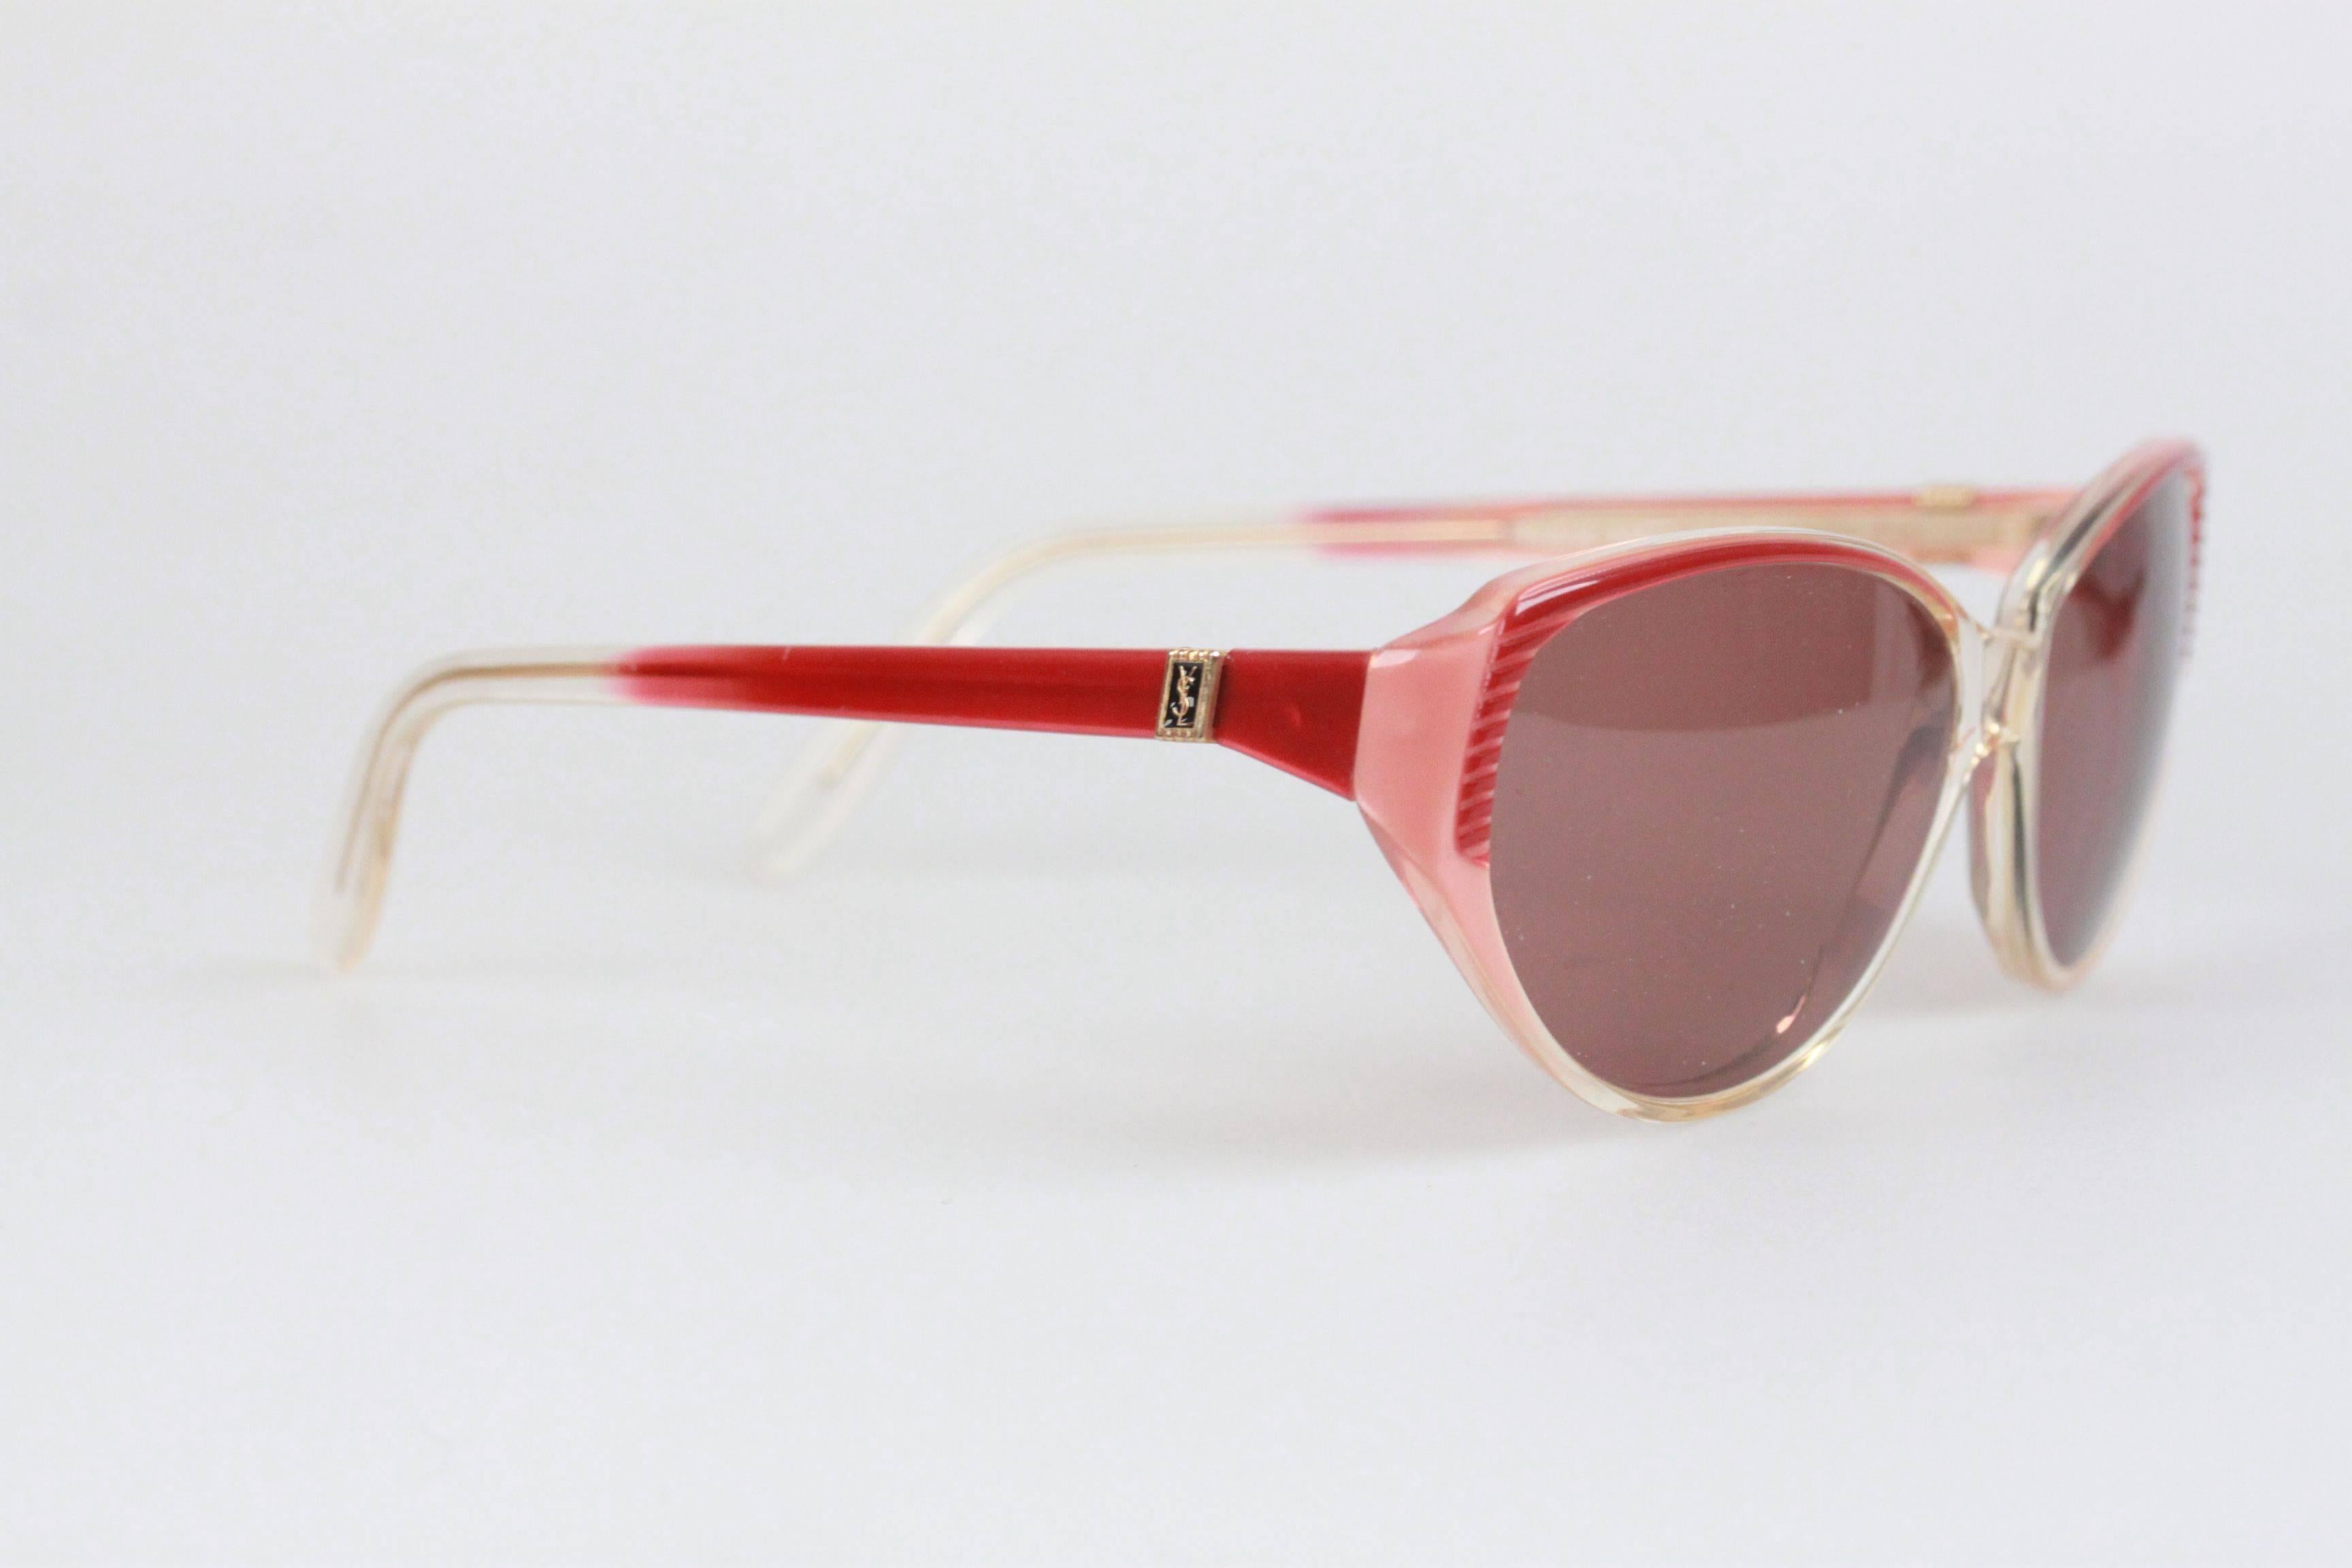 - Mod. ISMENE
- Period/Era: 1980s
- Red-Pink/Clear plastic frame
- Yves Saint Laurent logo on temples
- 100% UV protection gray lenses
- Made in France

Measurements:
- TEMPLE LENGTH: 135 mm
- TEMPLE TO TEMPLE - MAX WIDTH: 130 mm
- EYE / LENS WIDTH: